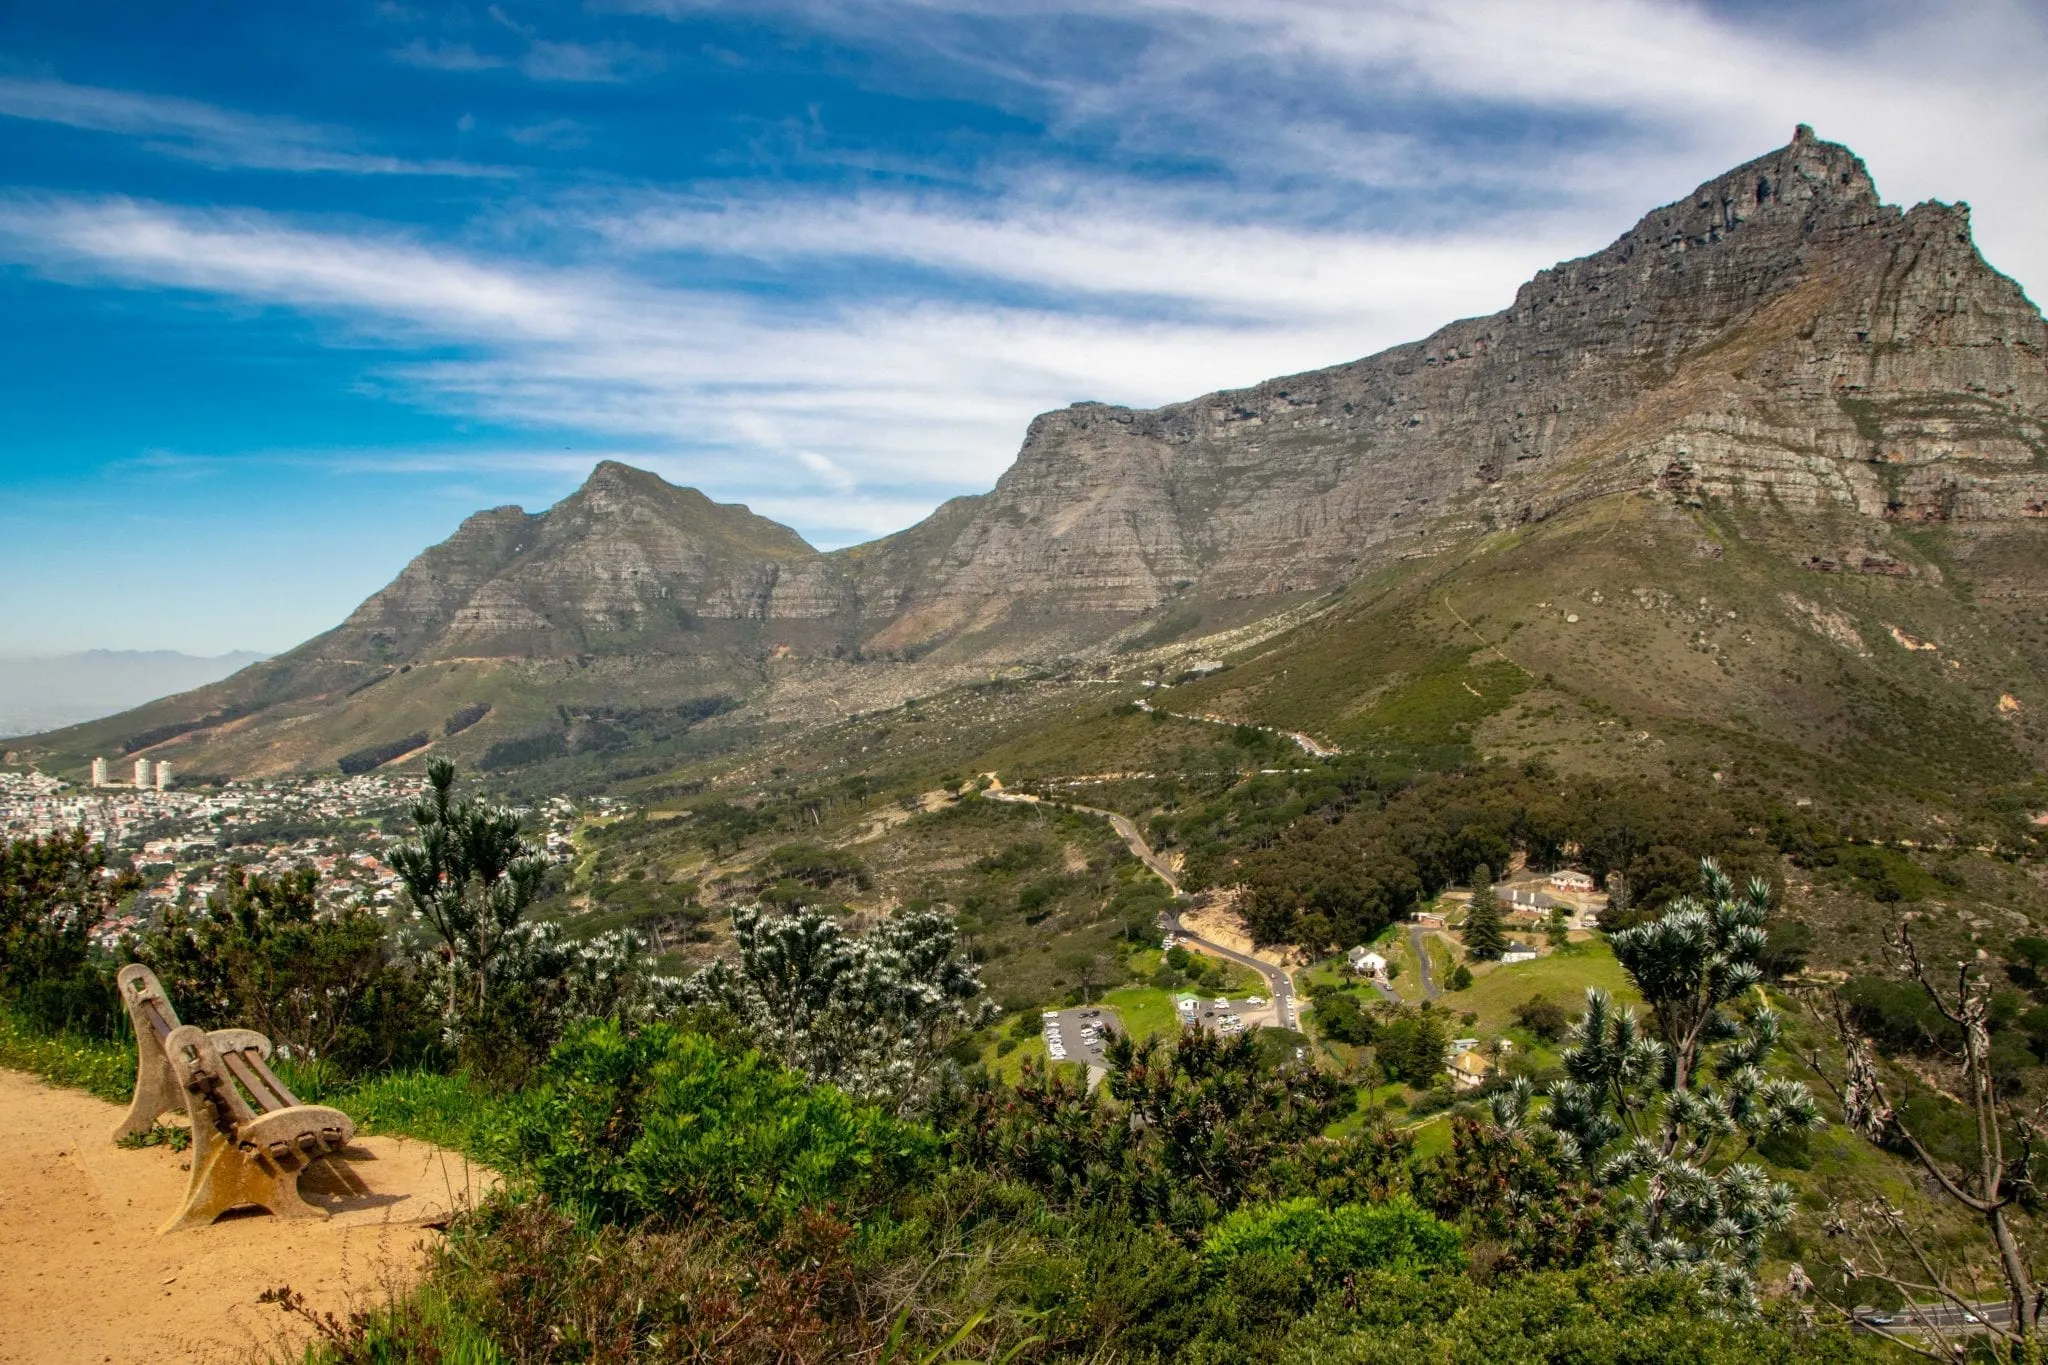 3 Day Cape Town Itinerary: View of Table Mountain